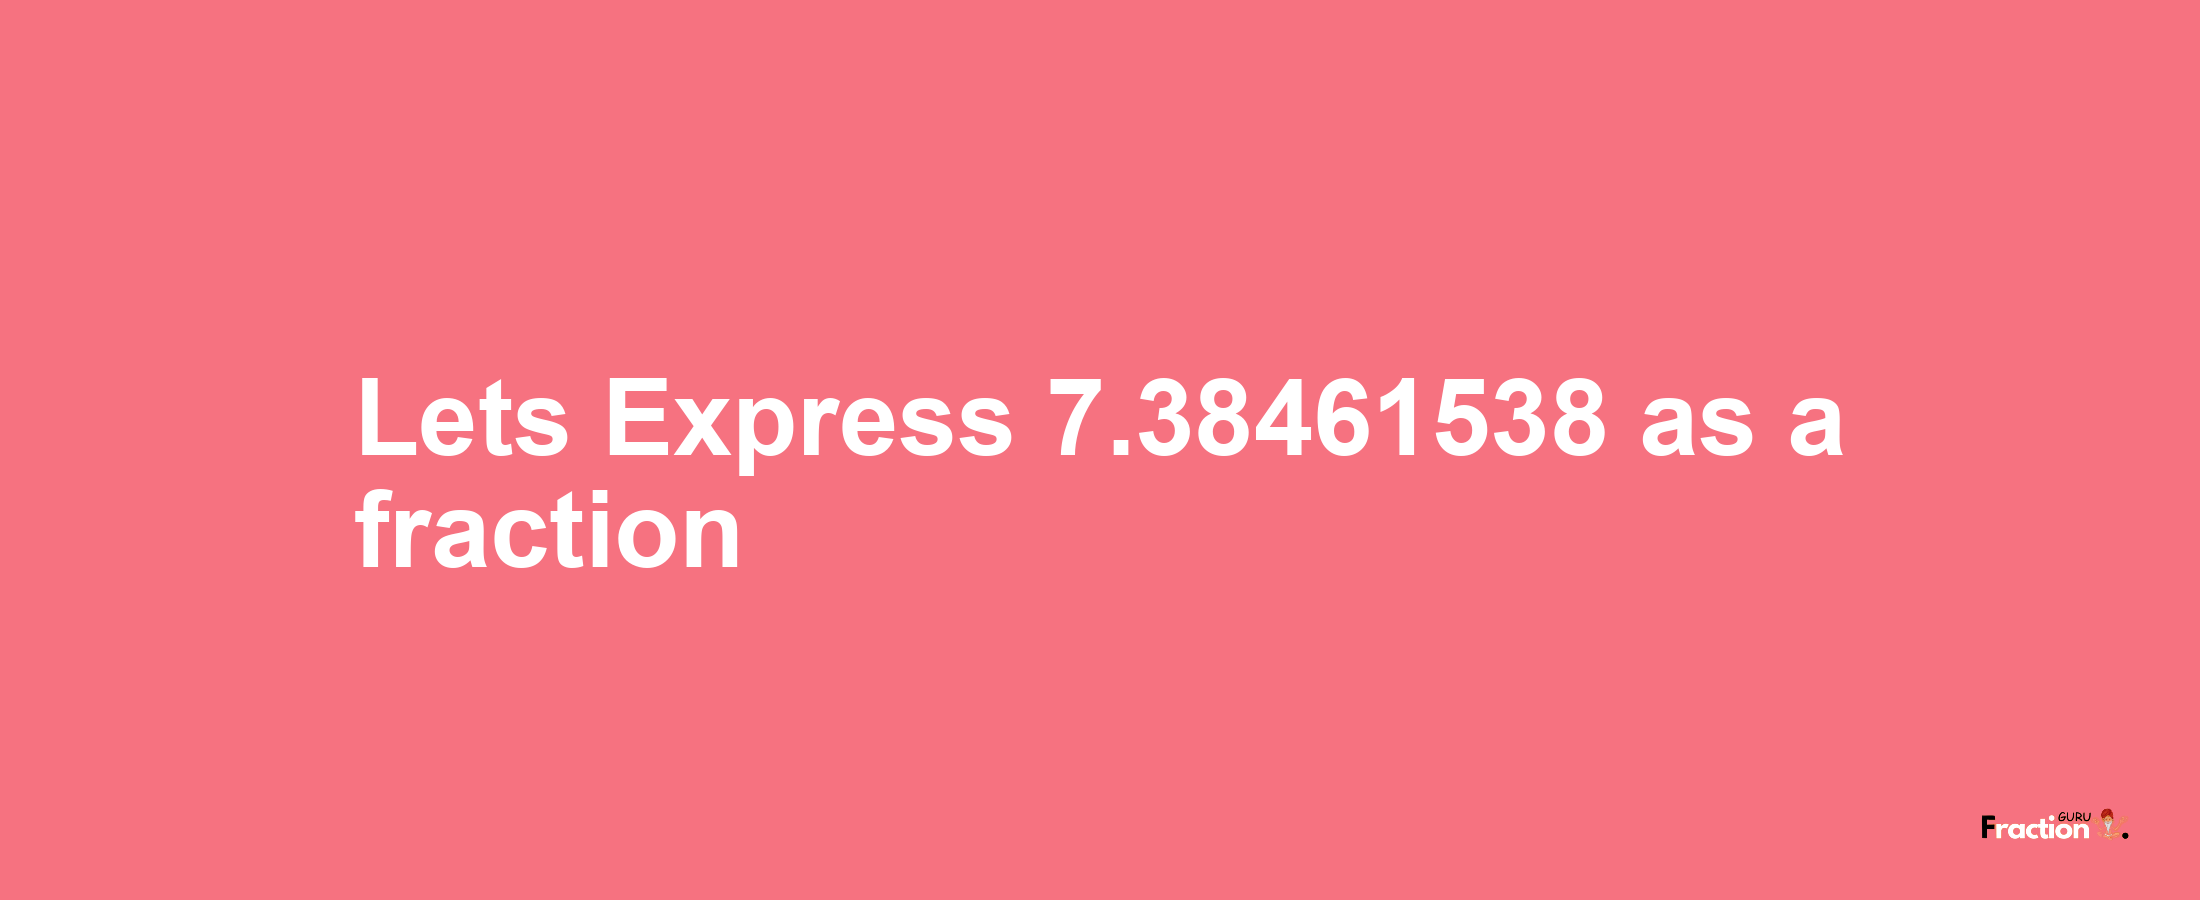 Lets Express 7.38461538 as afraction